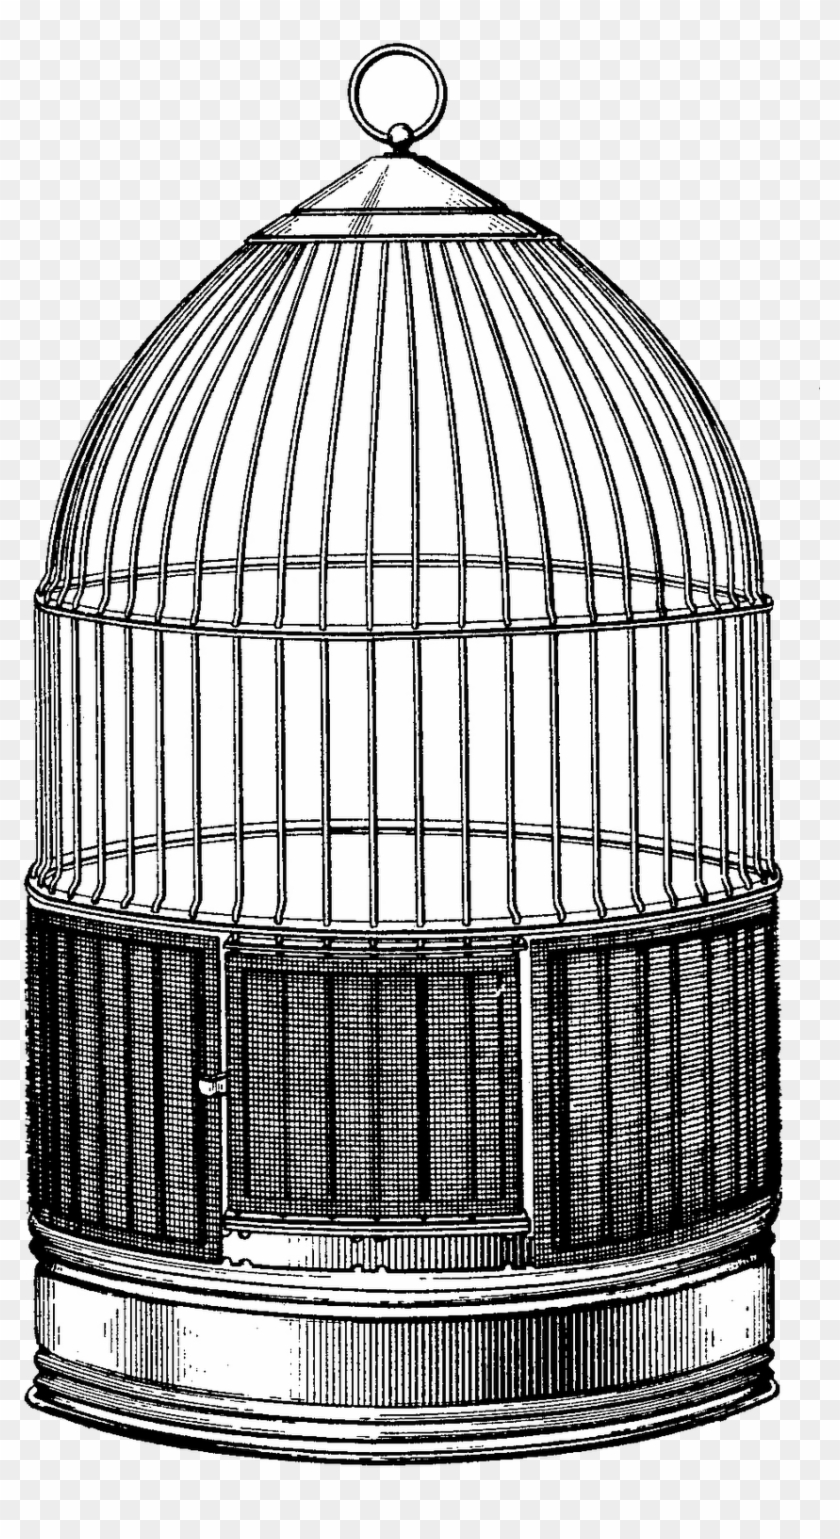 Steampunk Bird Cages - Vintage Bird Cage Drawing Clipart #1743420